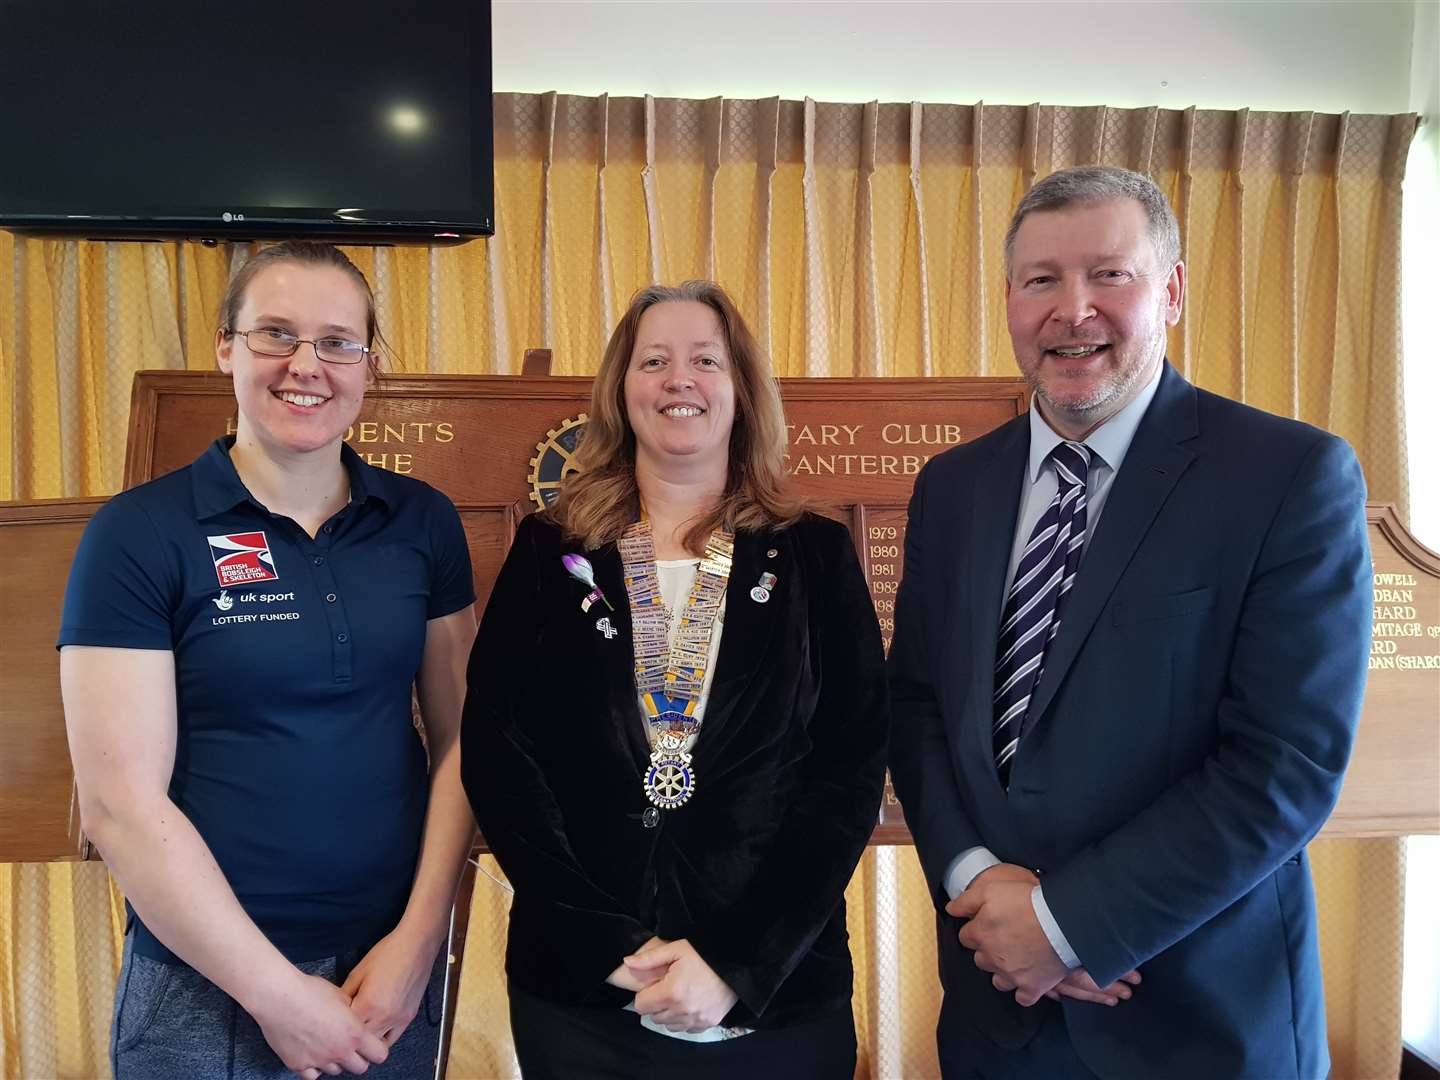 Olympic hopeful Rachel Hanagan with Sharon Jordan, president of the Club Council for Canterbury Rotary, and Simon Dolby of the KM Charity Team. (1307482)